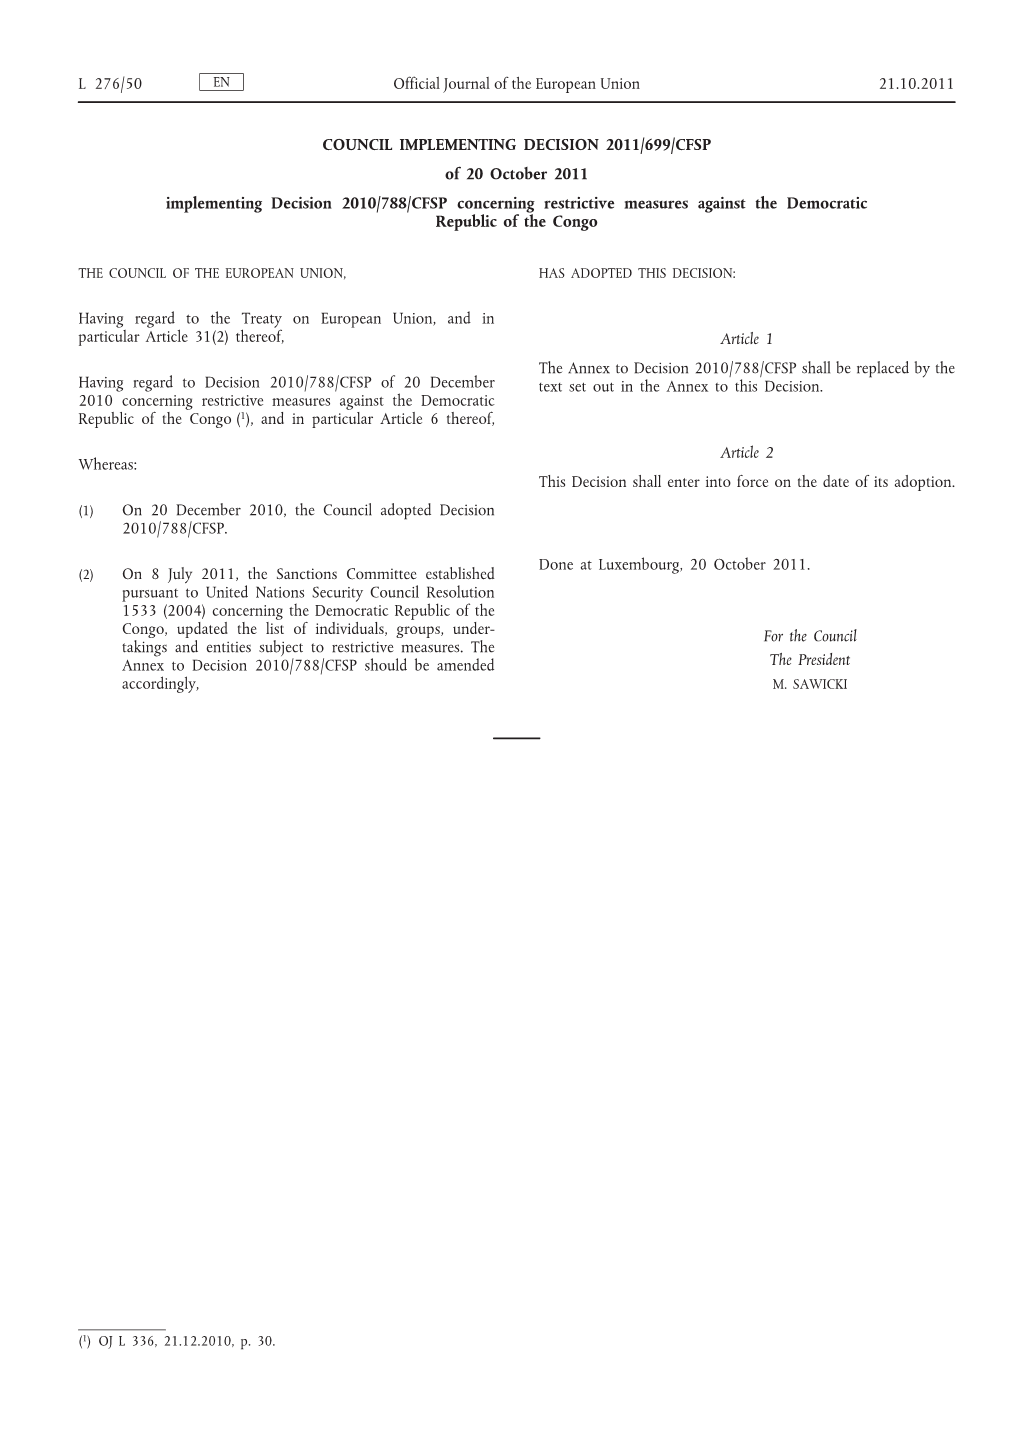 Council Implementing Decision 2011/699/CFSP of 20 October 2011